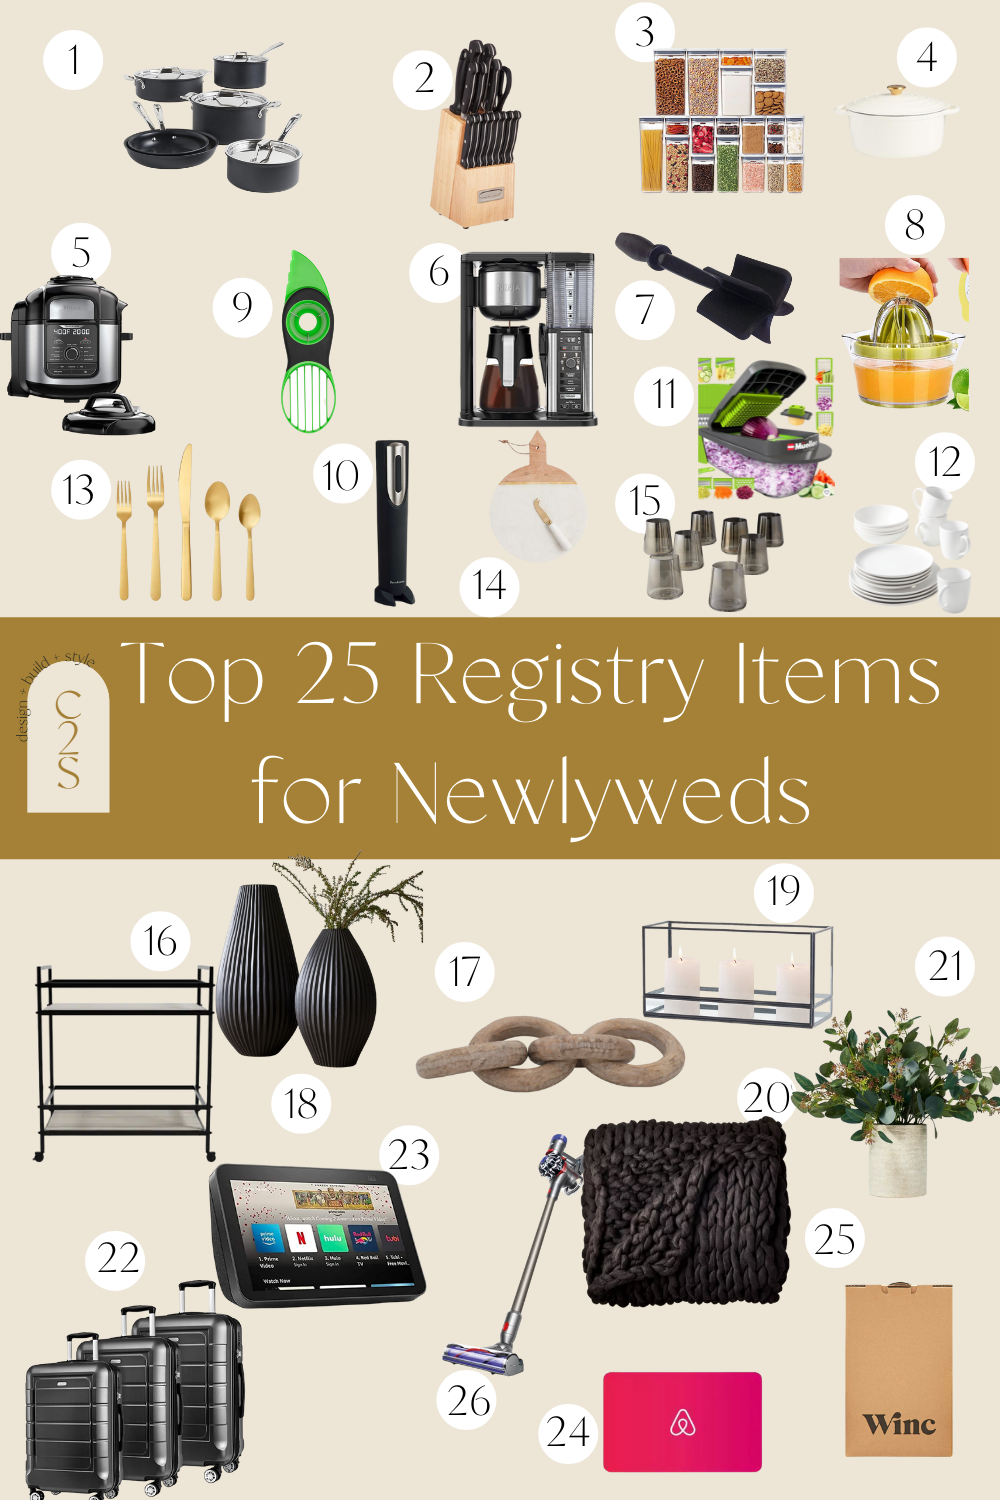 Top 25 Registry Items for Newlyweds 7